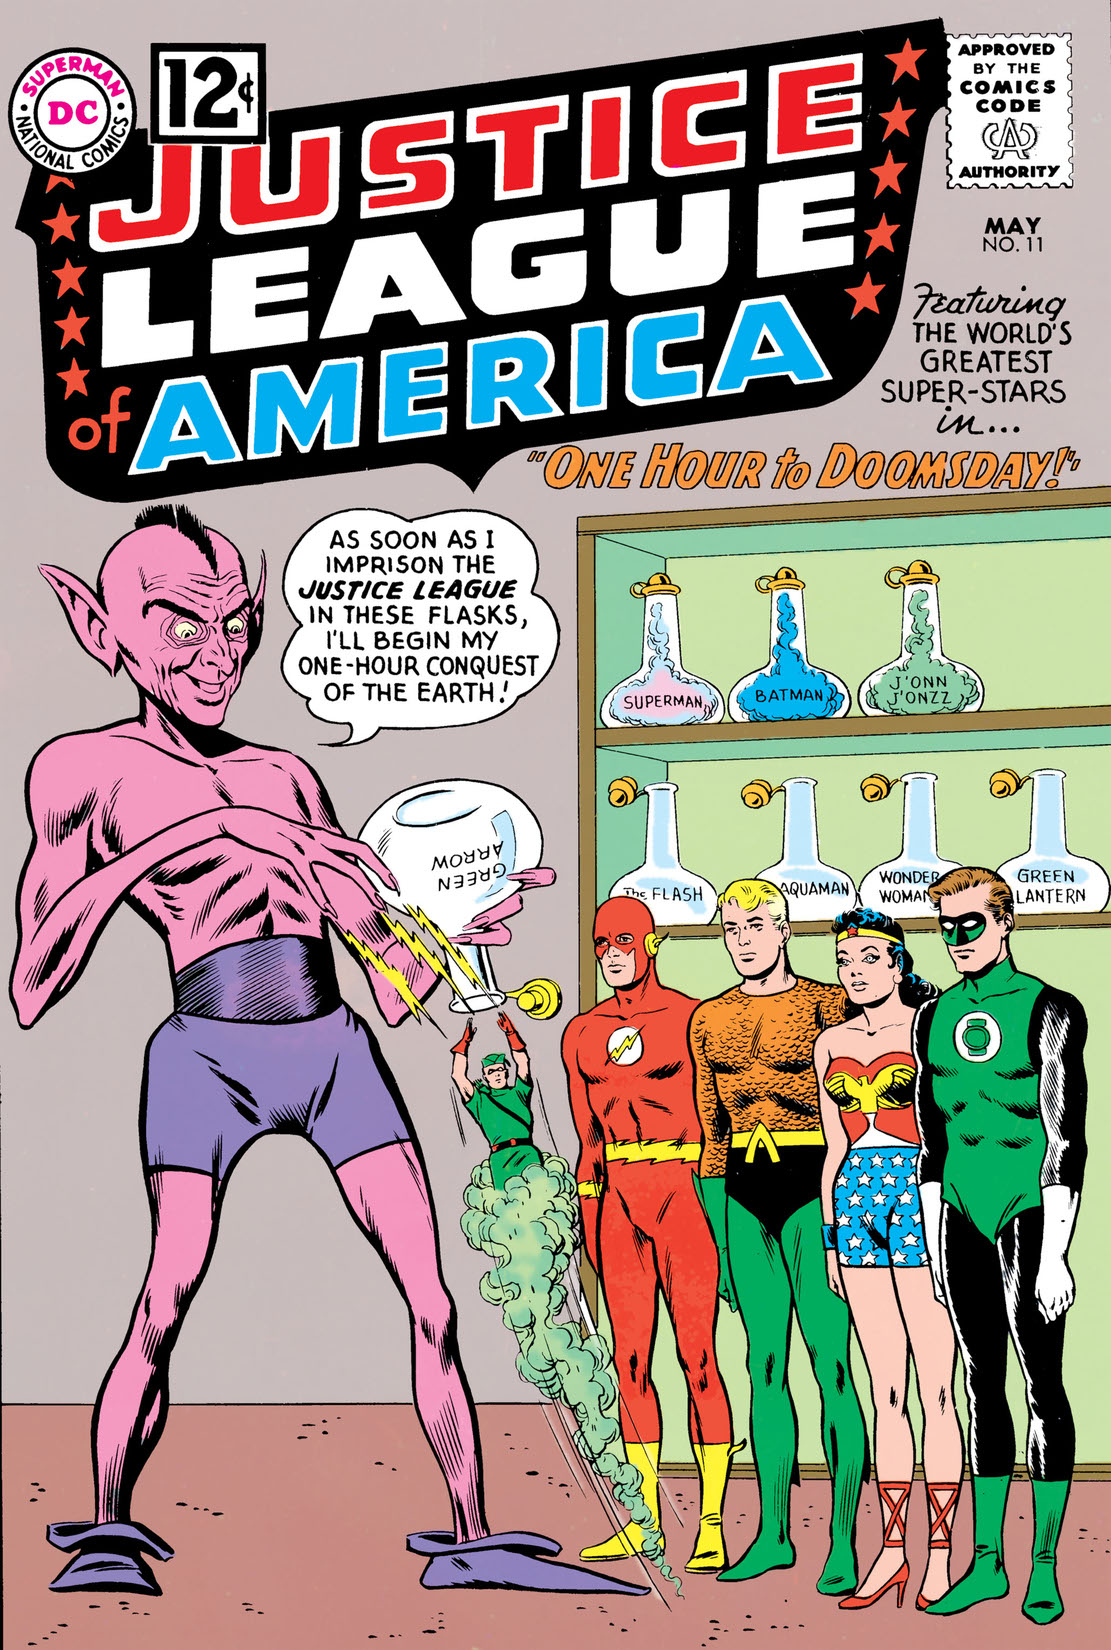 Justice League of America (1960-) #11 preview images